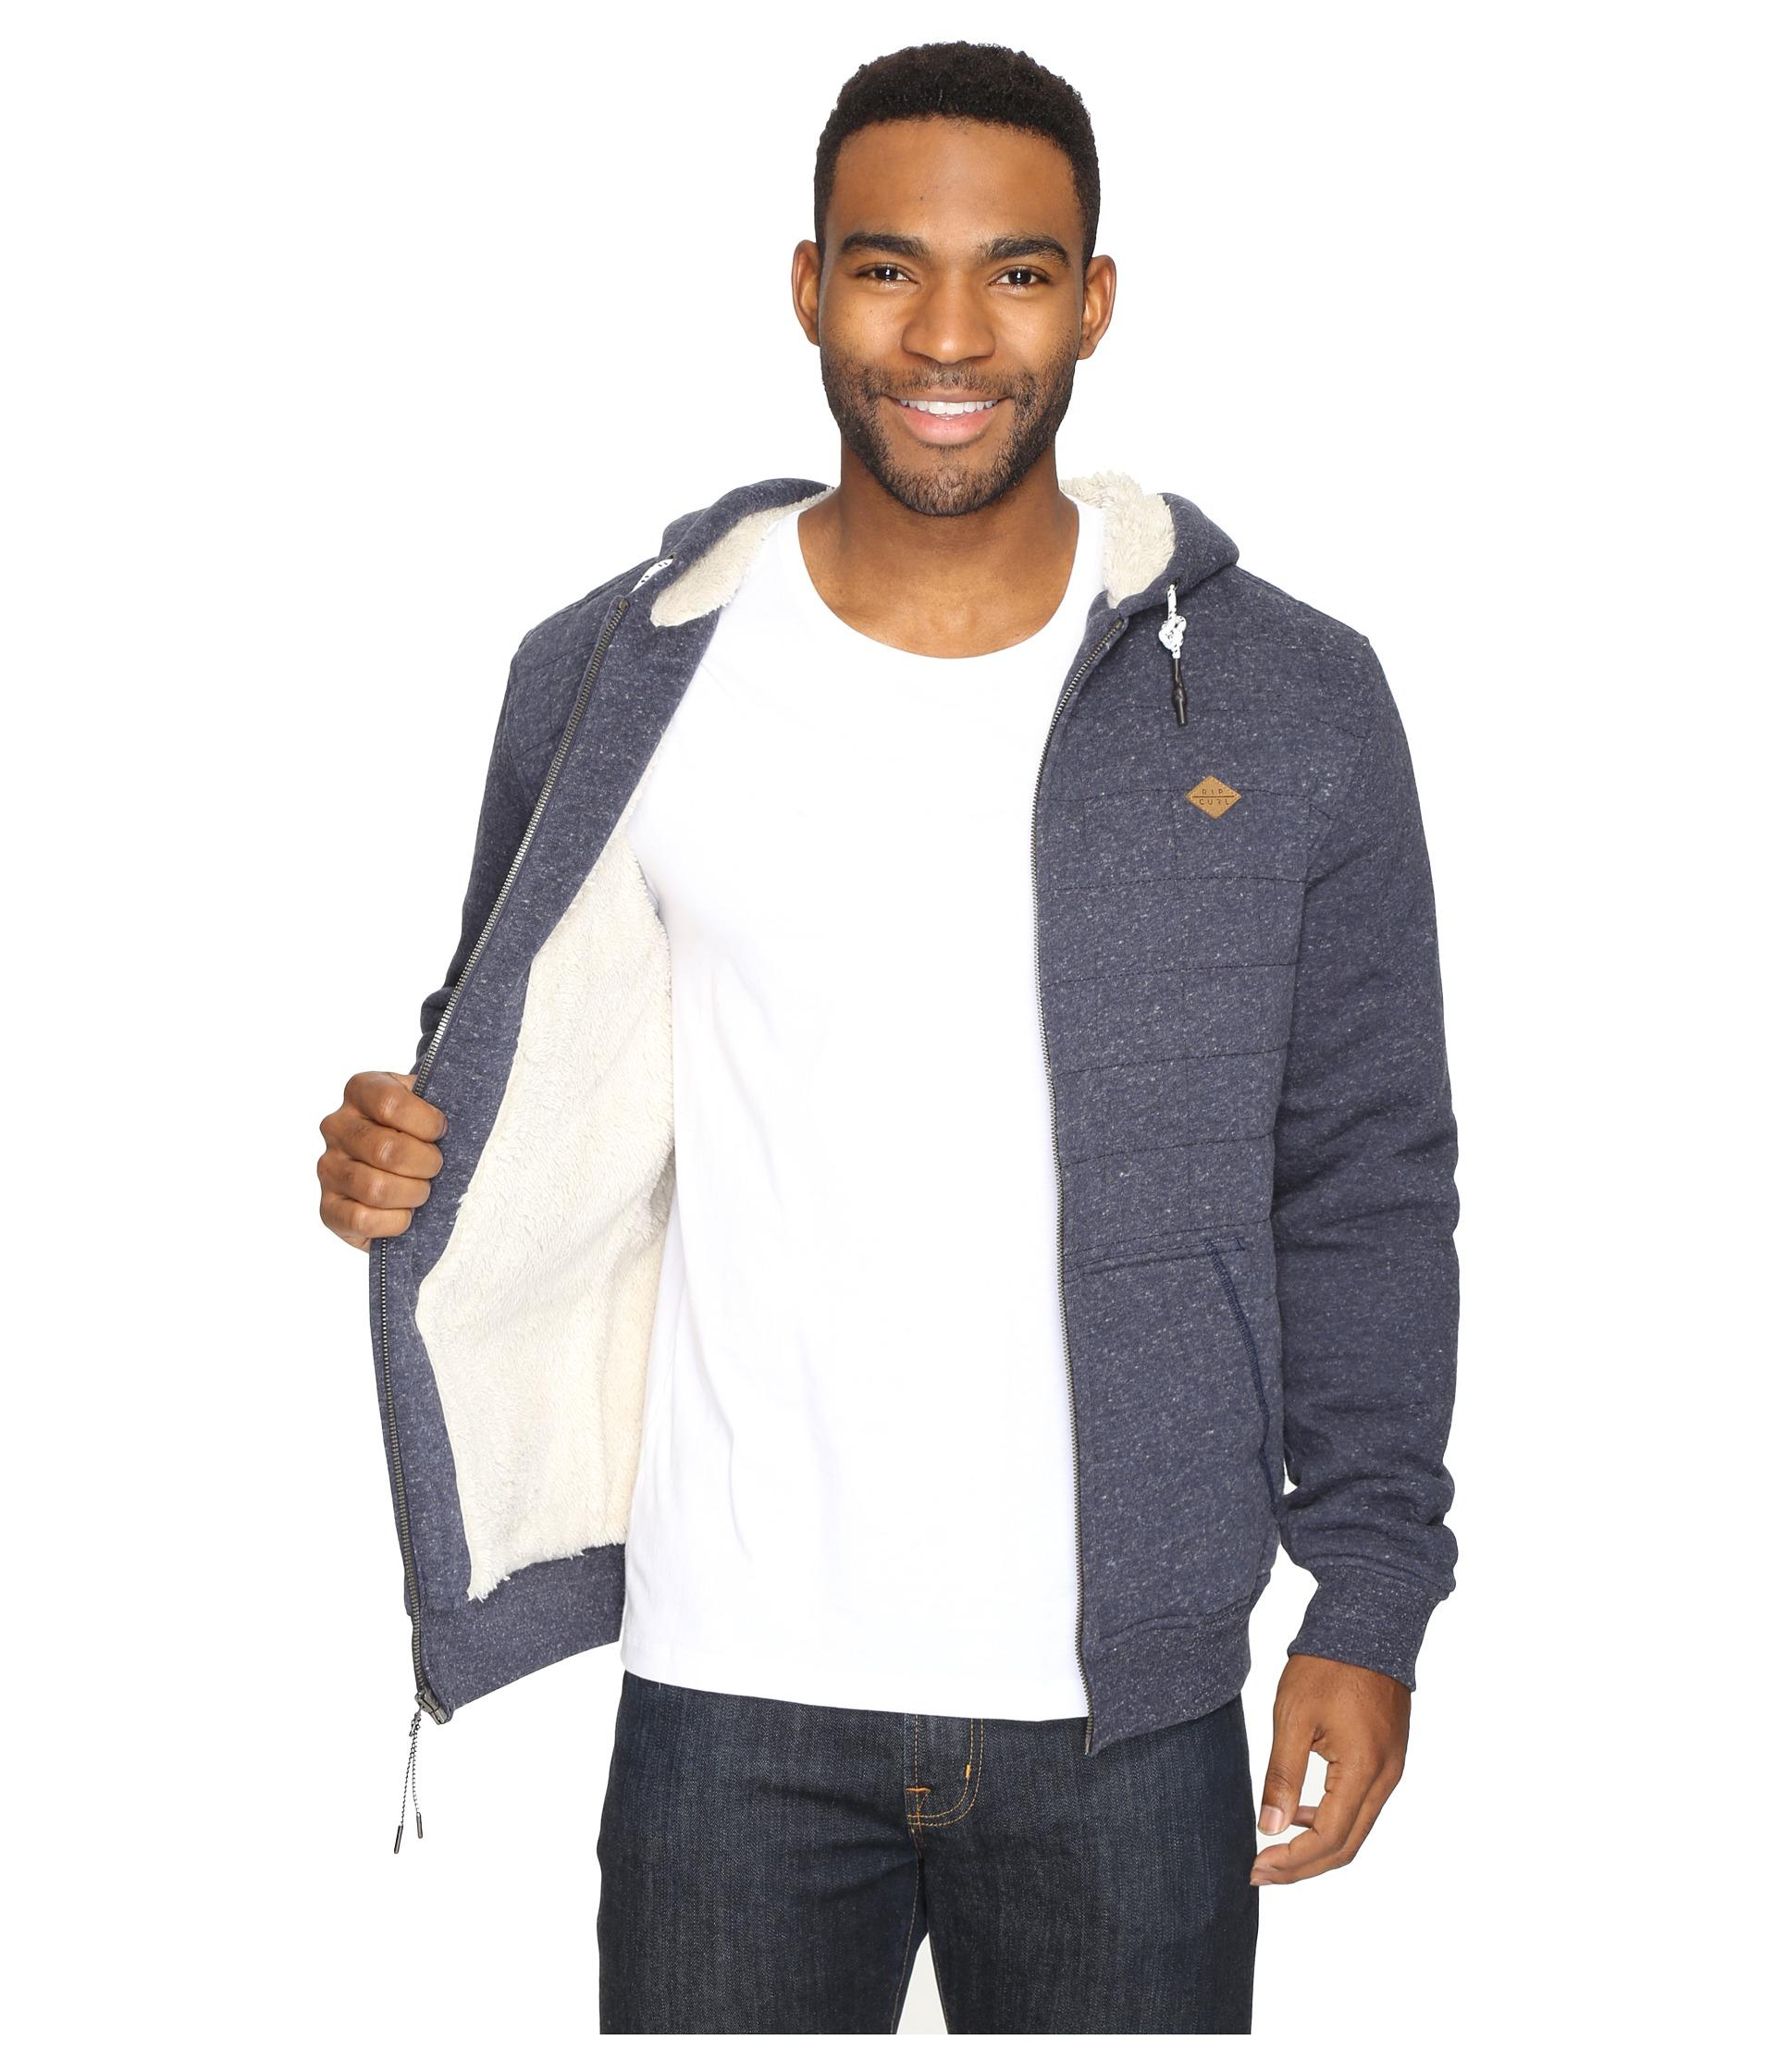 Rip Curl Surf Check Sherpa Fleece in Navy (Blue) for Men - Lyst